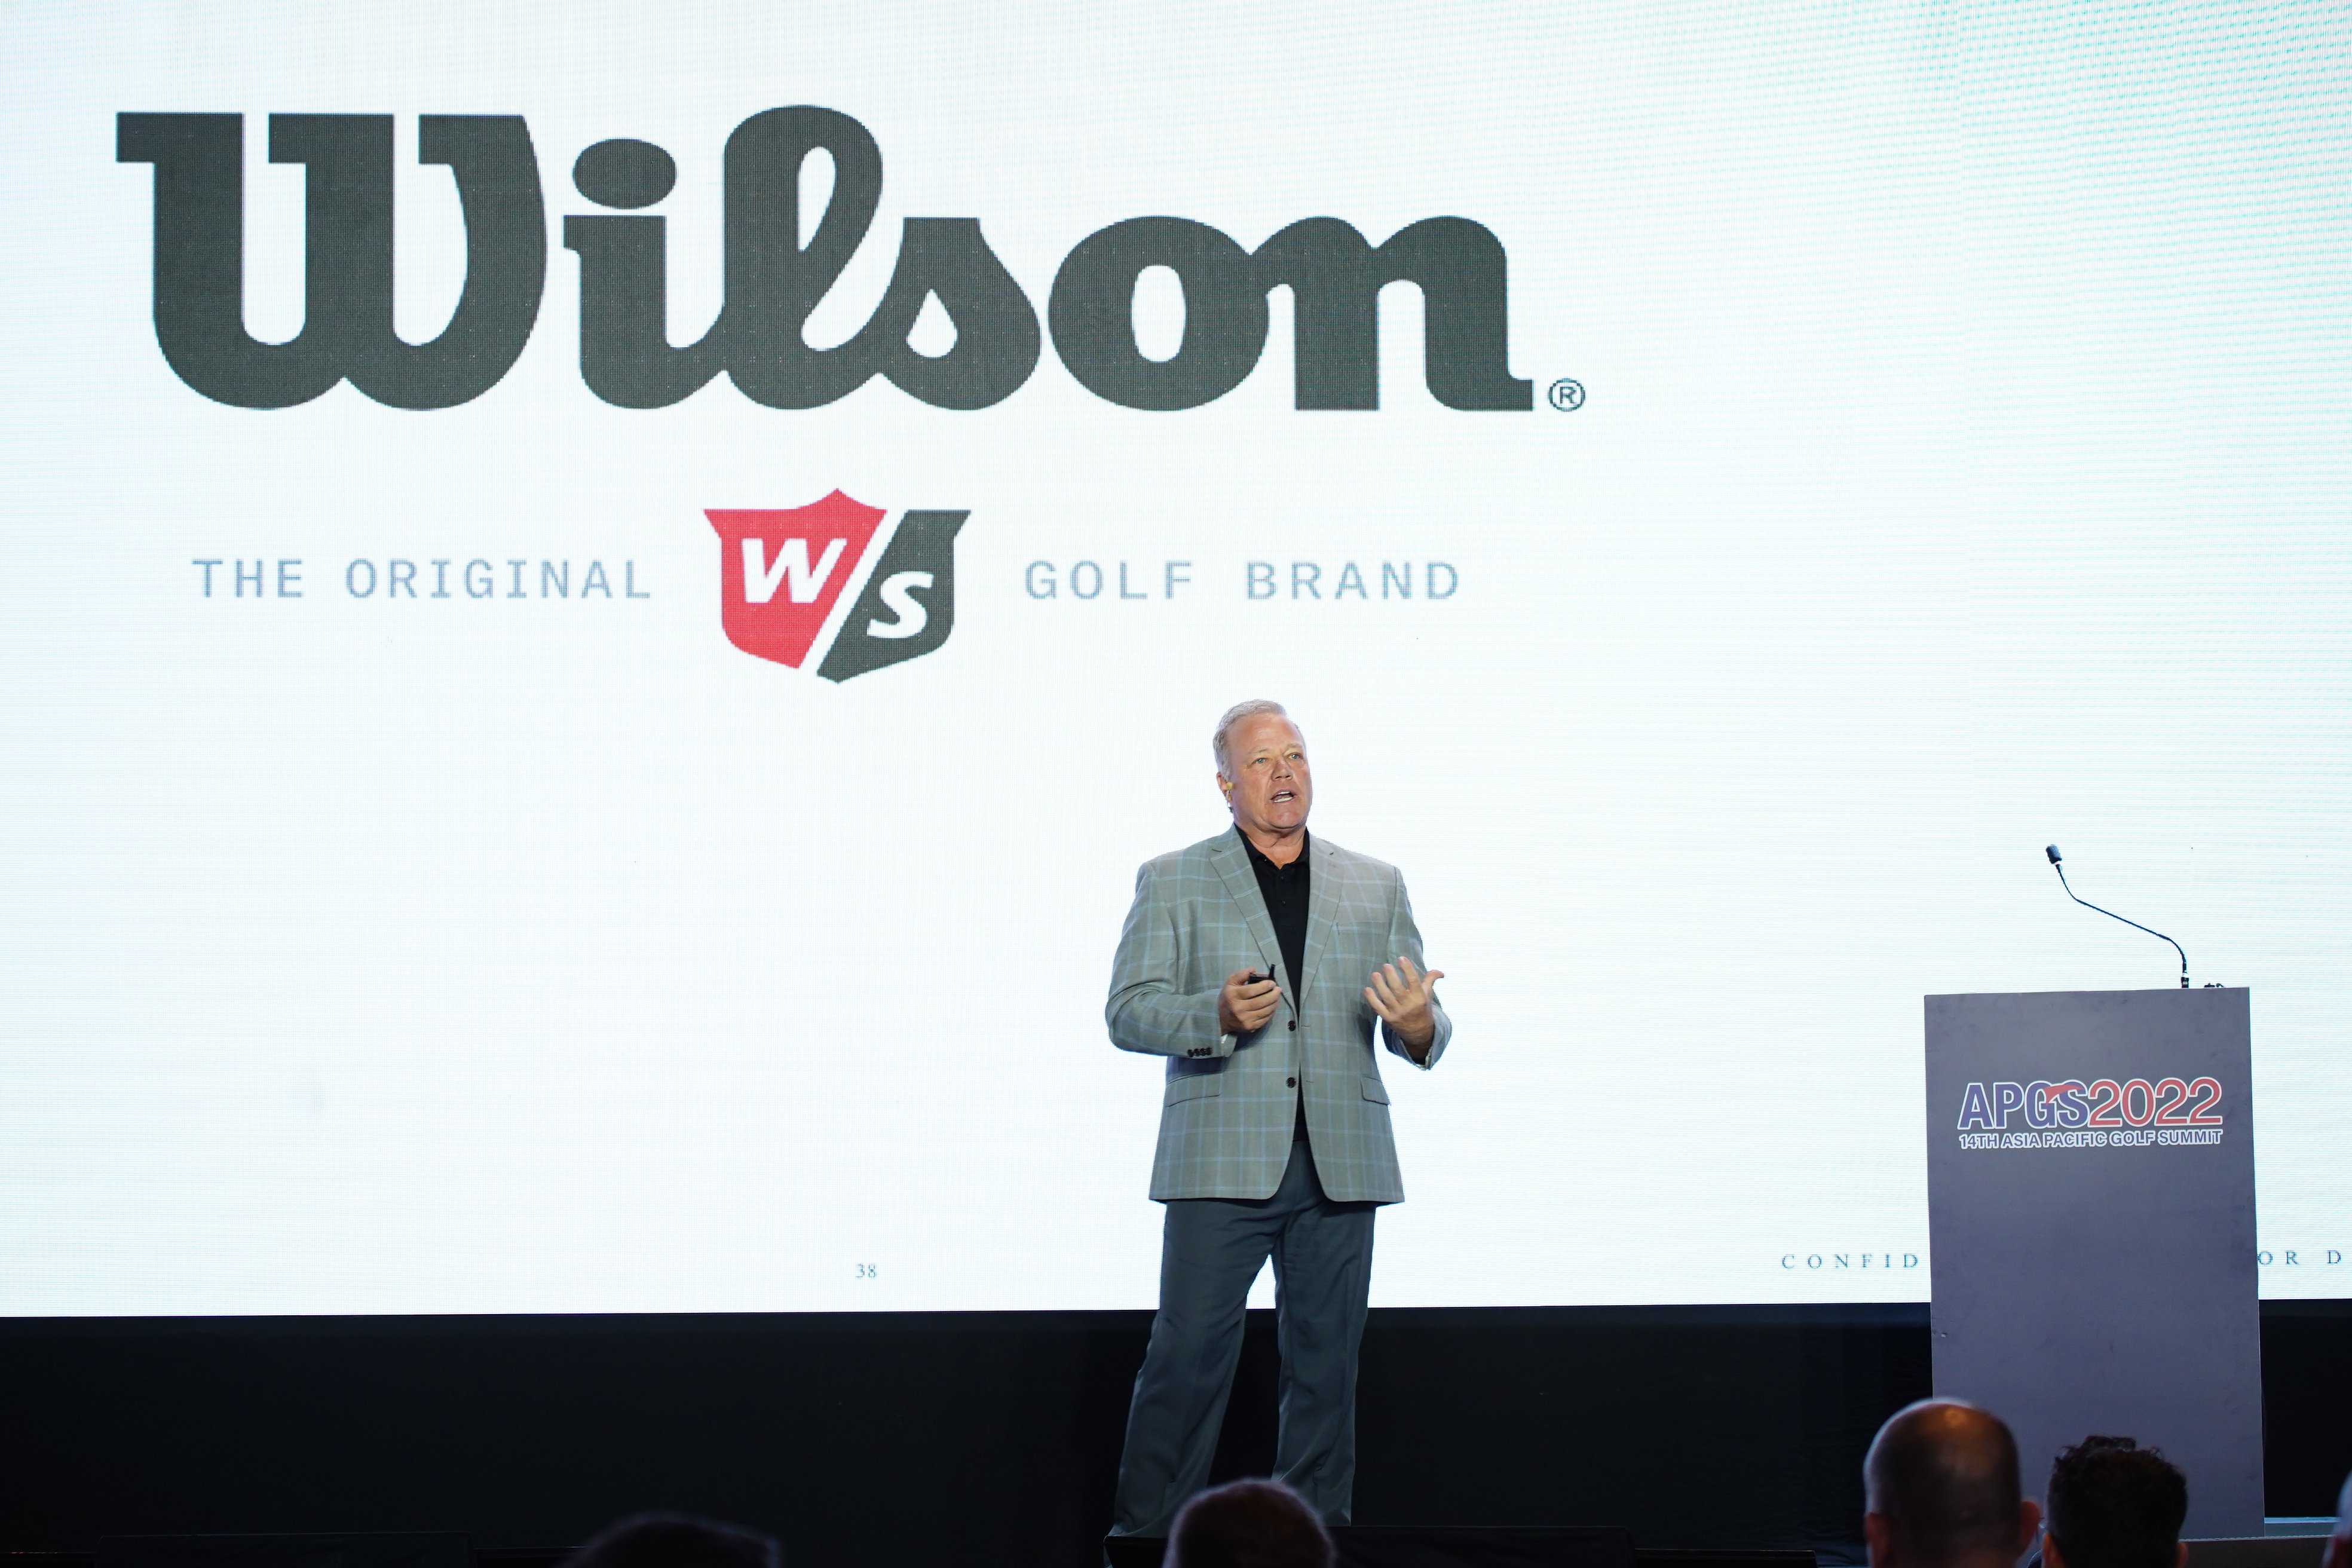 Tim Clarke, the President and CEO of Wilson Golf gave a speech at the summit